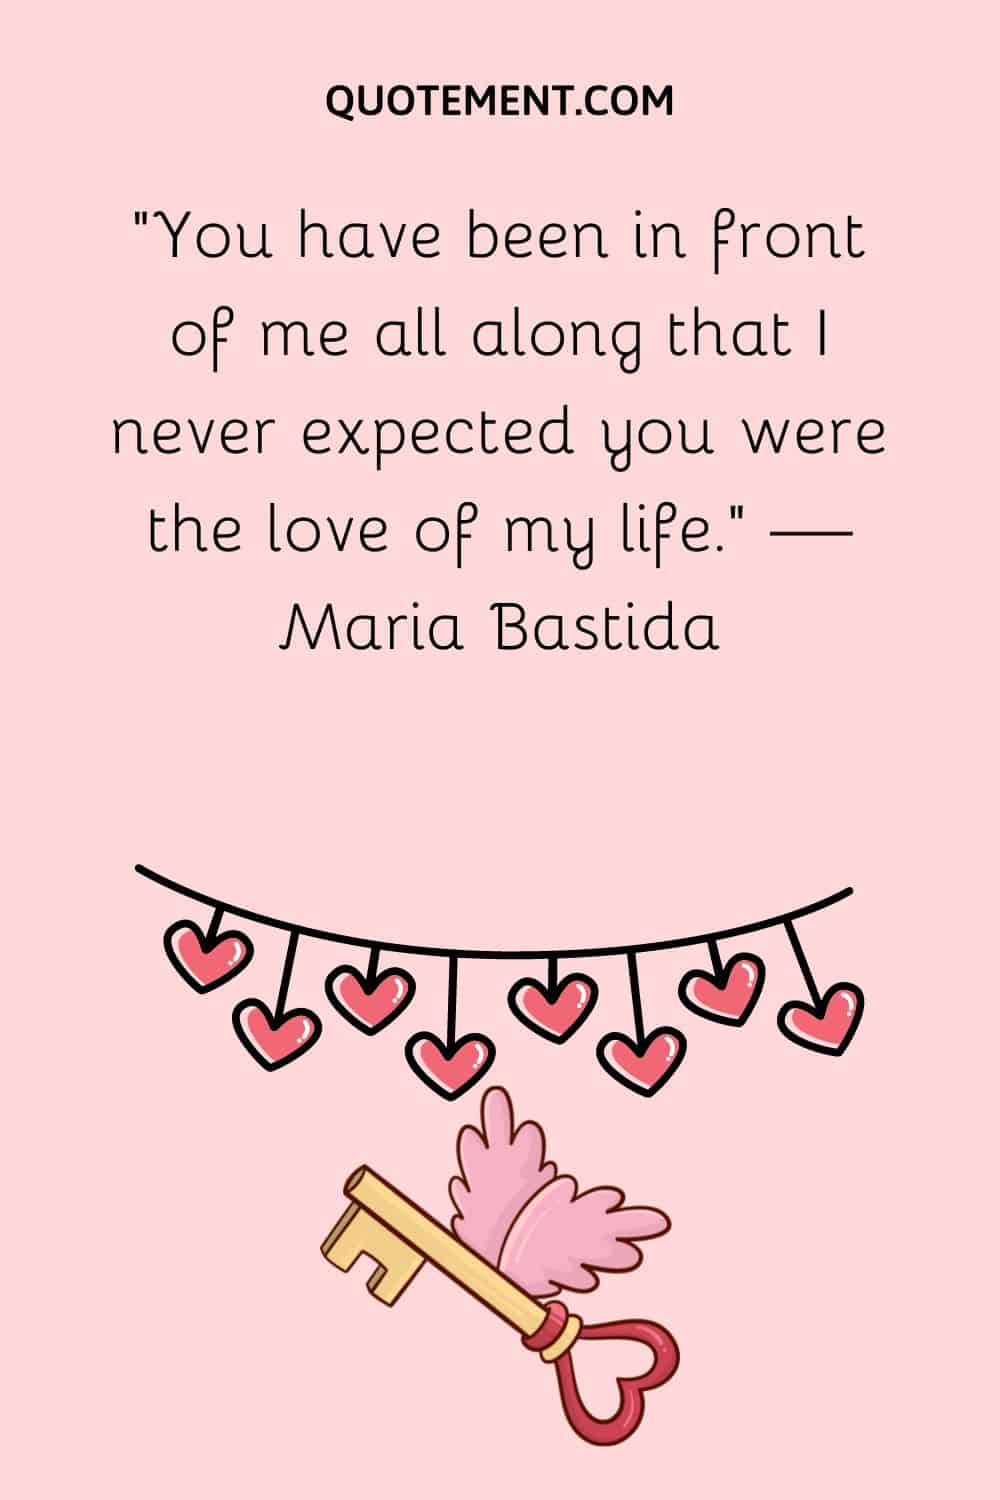 ”You have been in front of me all along that I never expected you were the love of my life.” — Maria Bastida